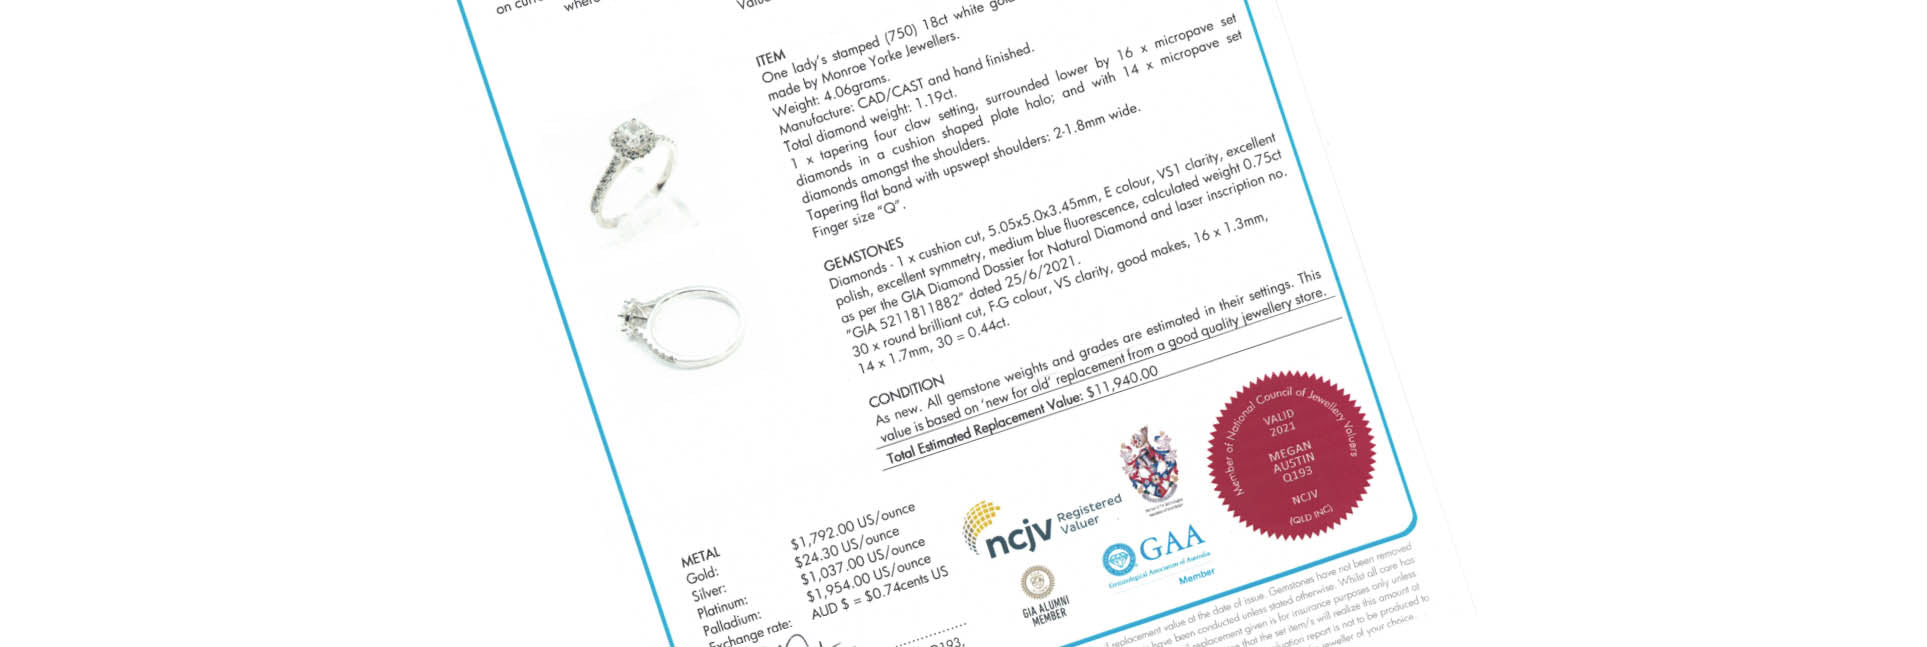 Independently certified and valued jewellery sold by Monroe Yorke Diamonds